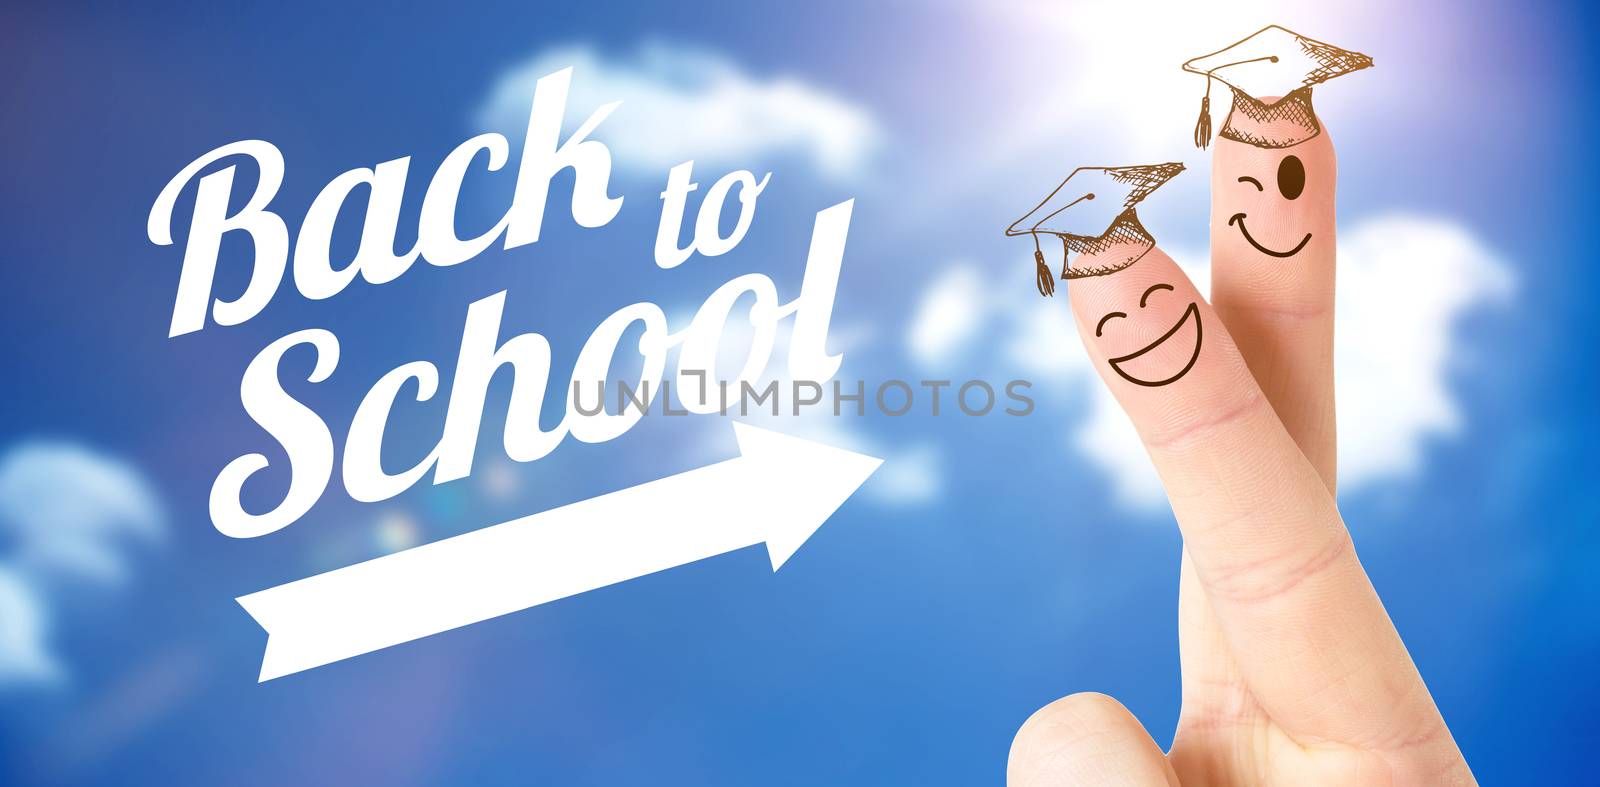 Fingers posed as students against bright blue sky with clouds